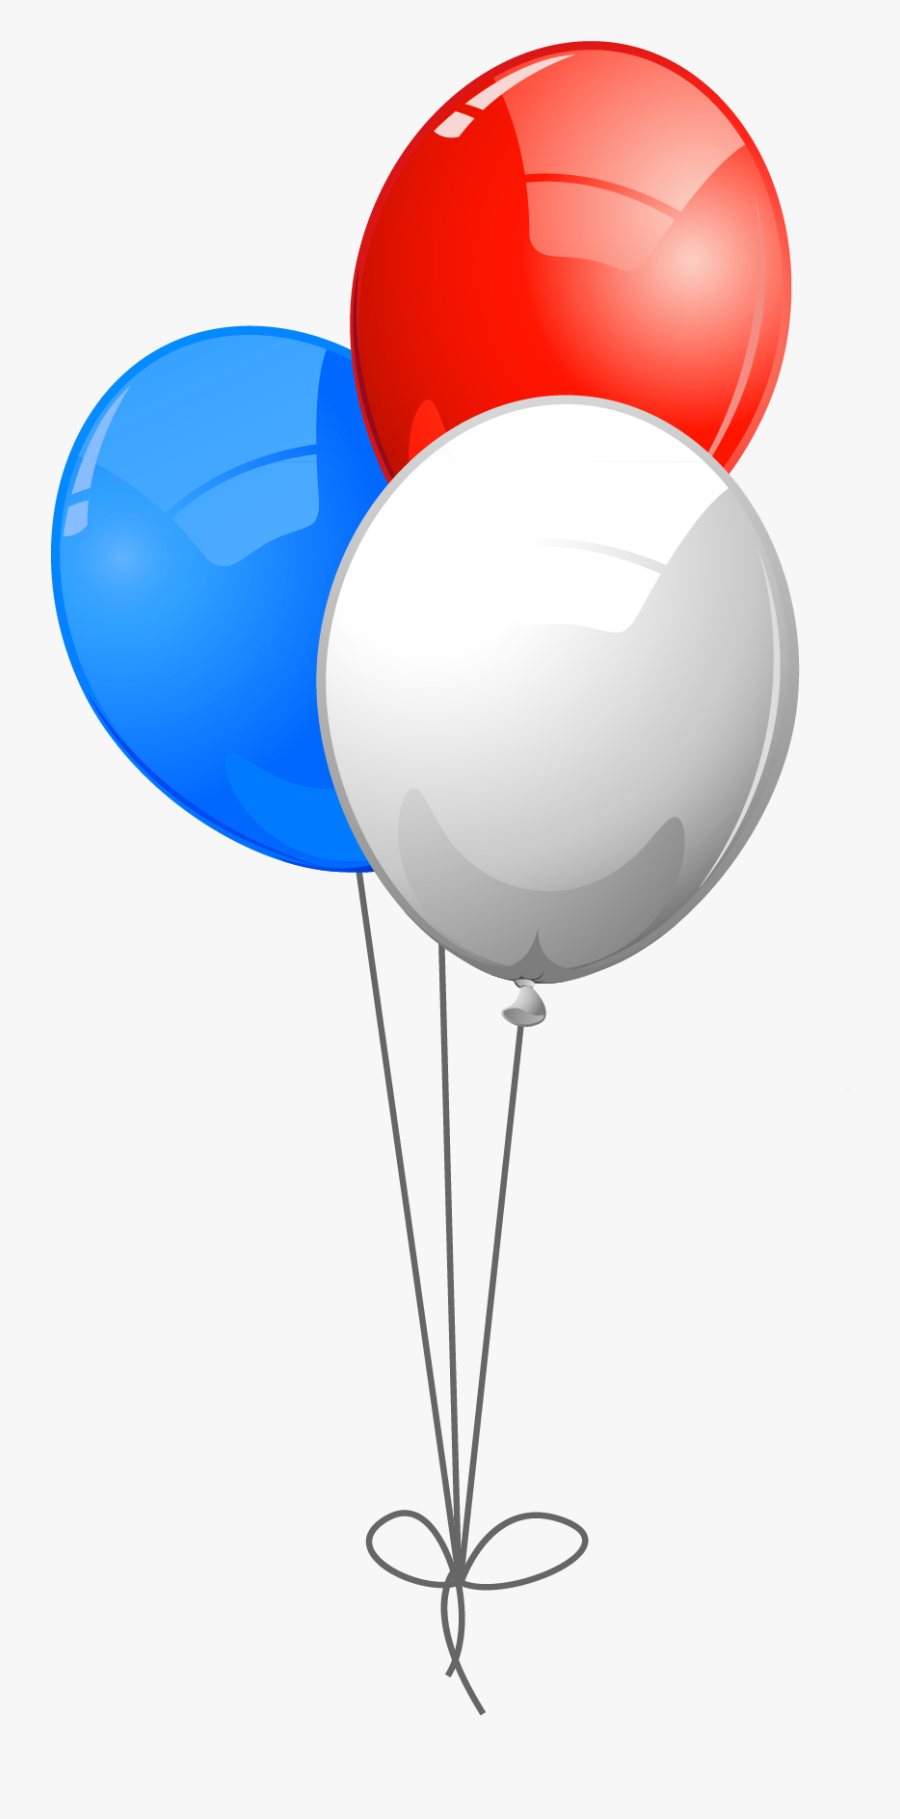 usa colors balloons png clipart red and blue balloon png free transparent clipart clipartkey usa colors balloons png clipart red